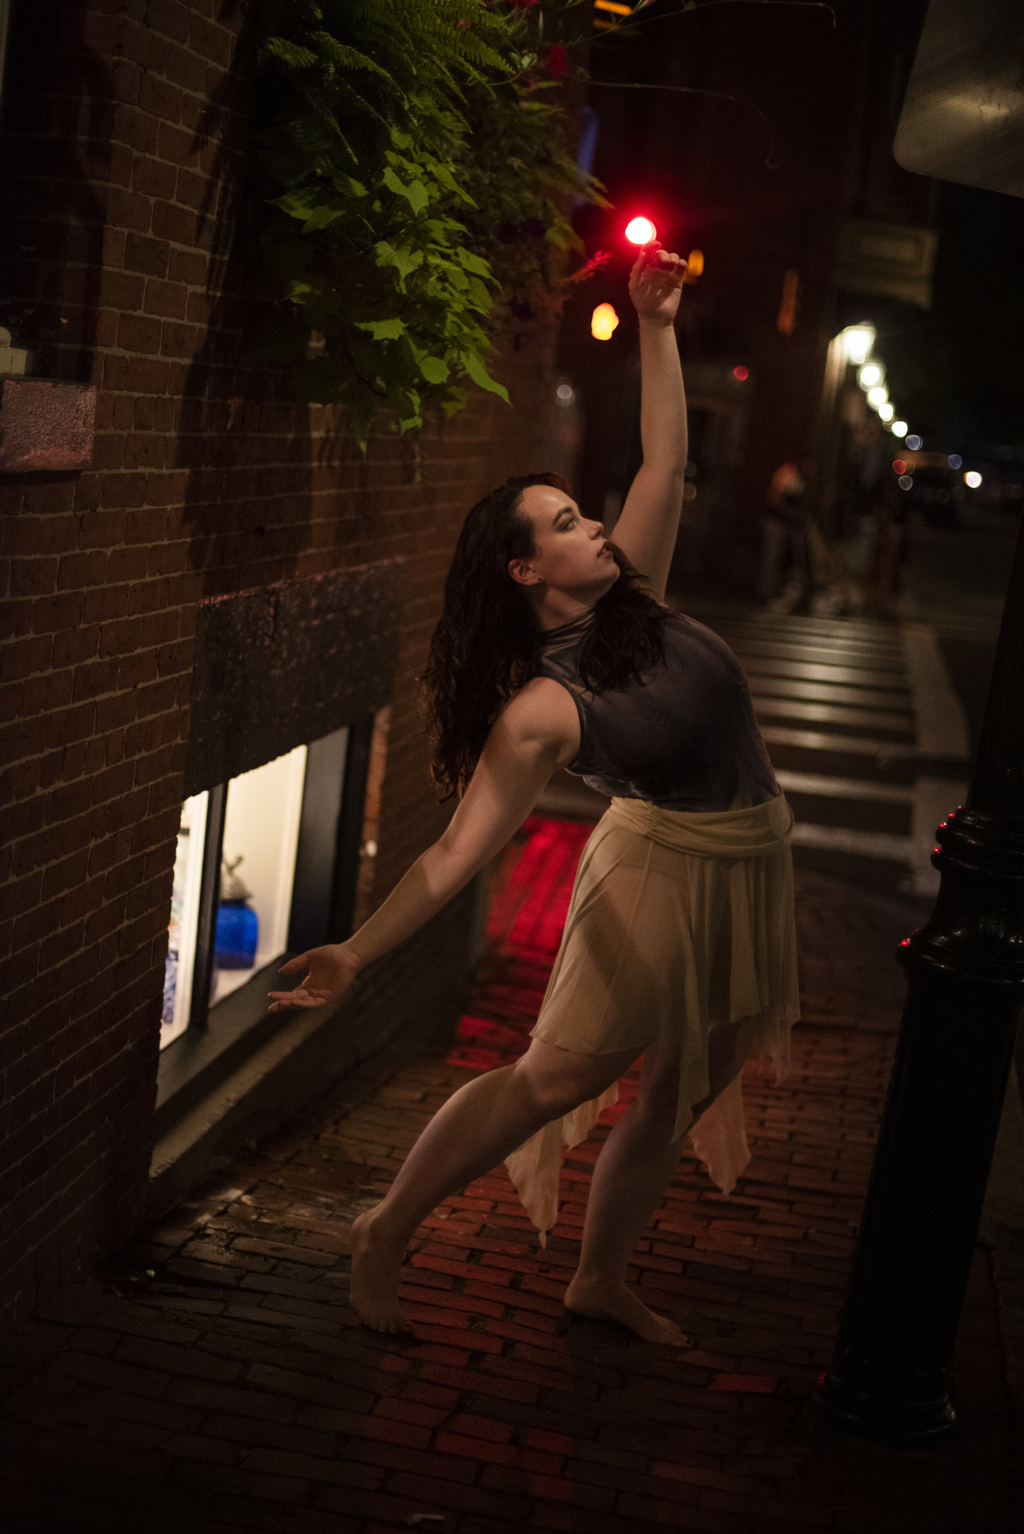 White woman arms outStanding in the brick lined streetRed light behind her